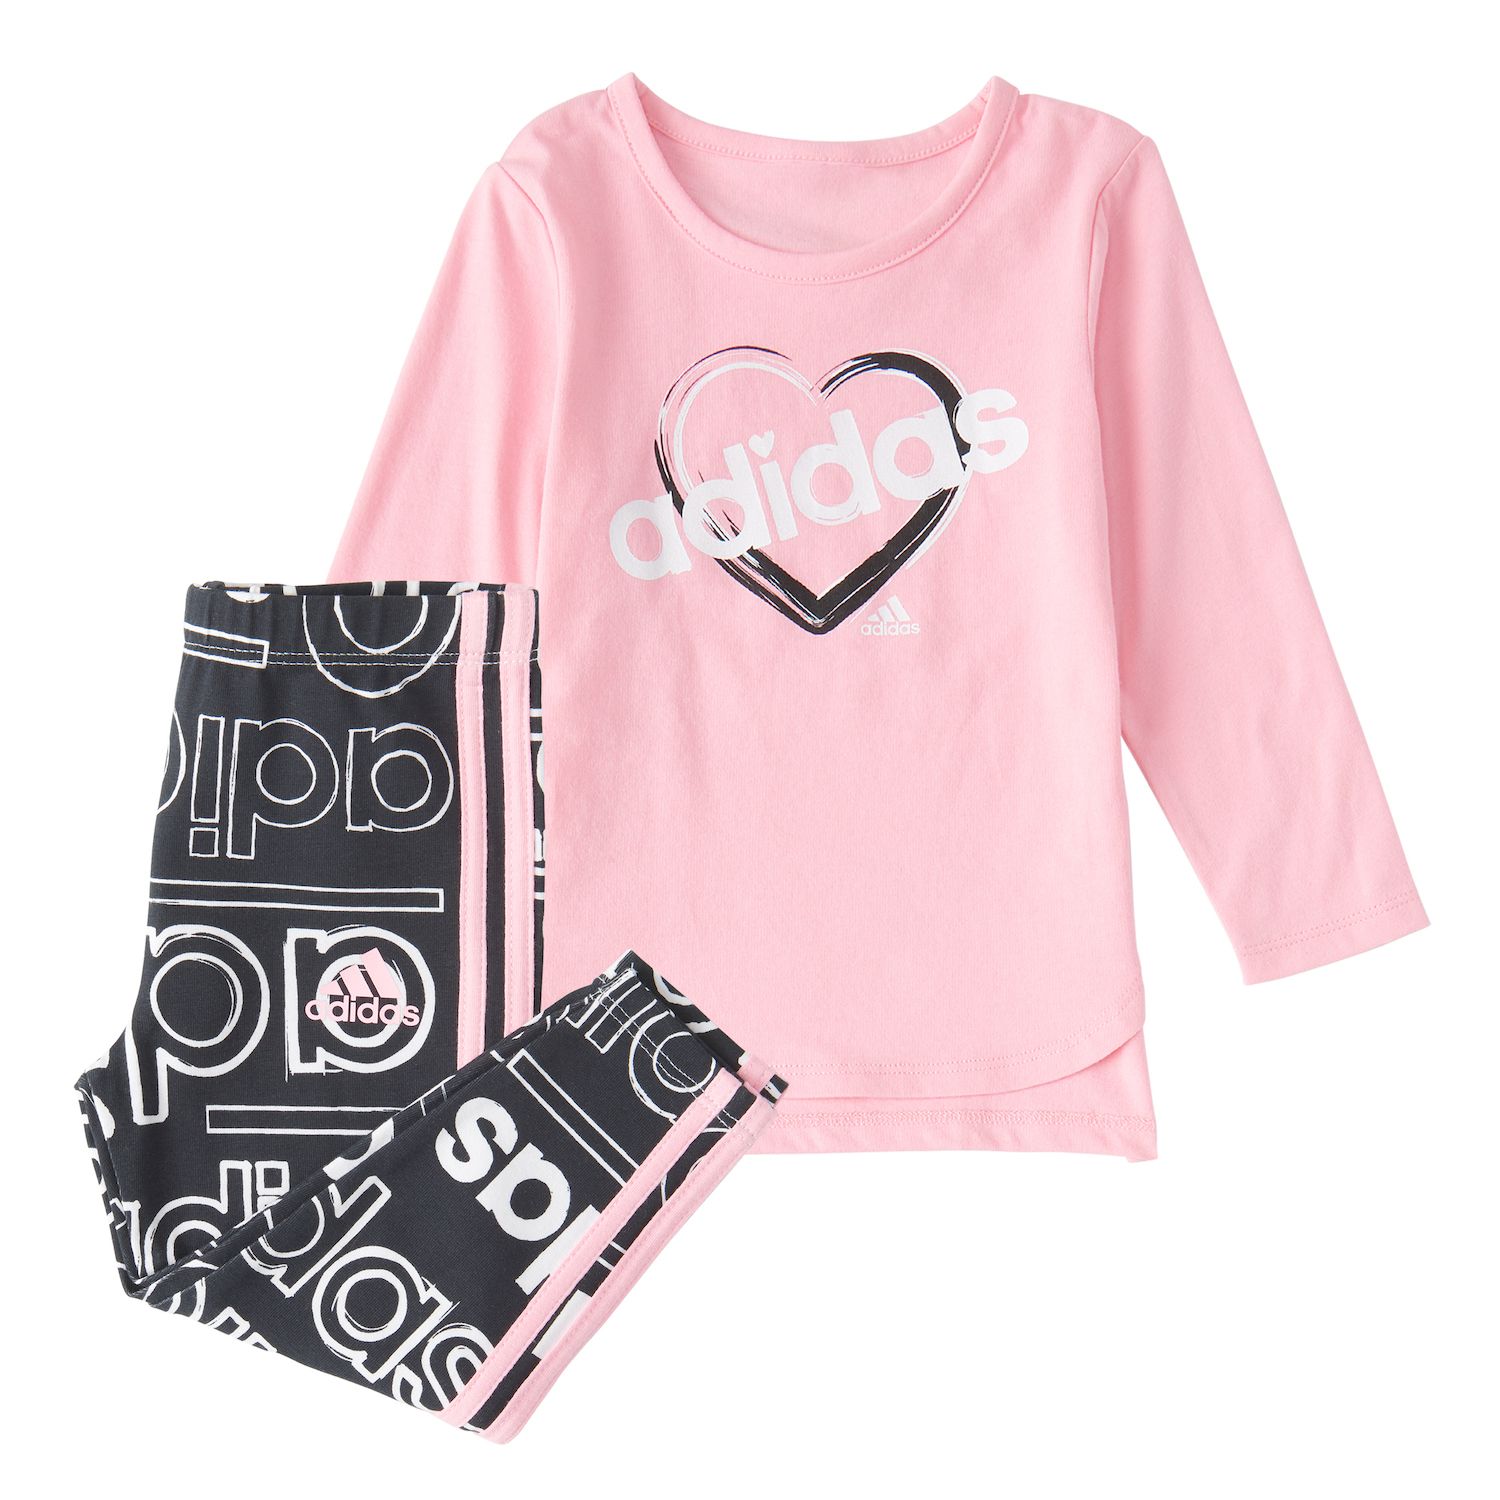 baby girl adidas outfit